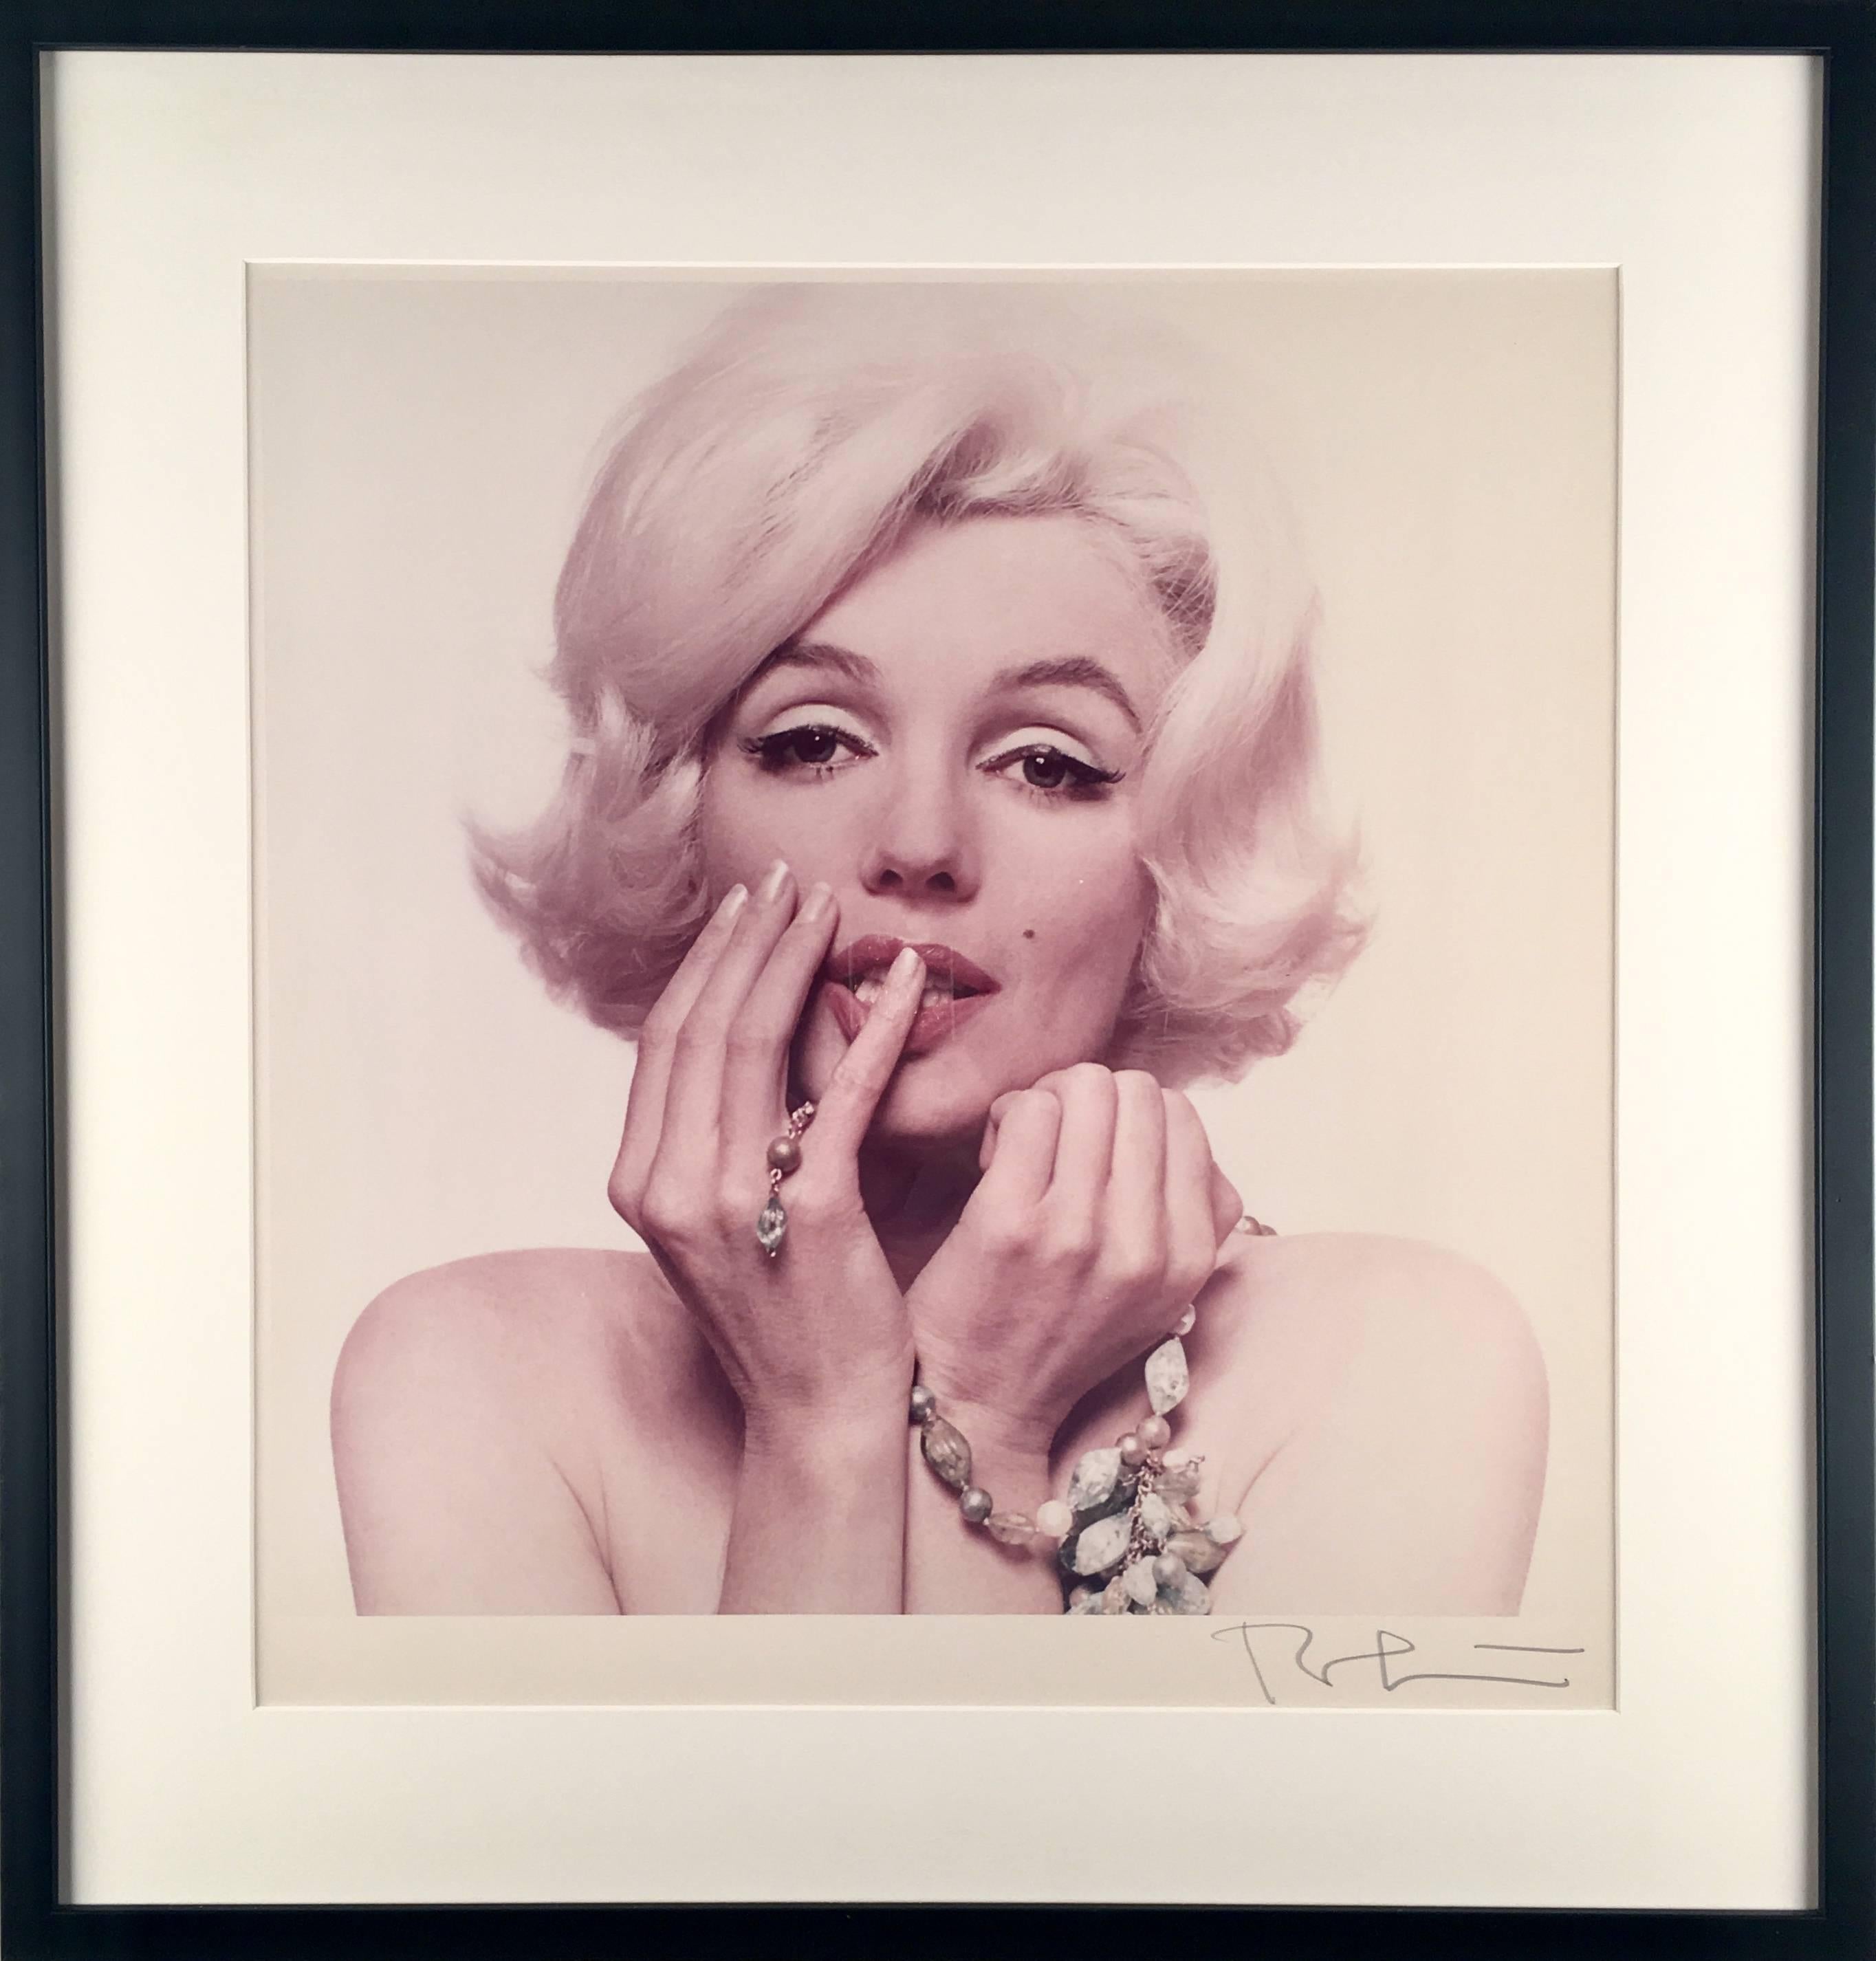 What's It All About from The Last Sitting - Photograph by Bert Stern